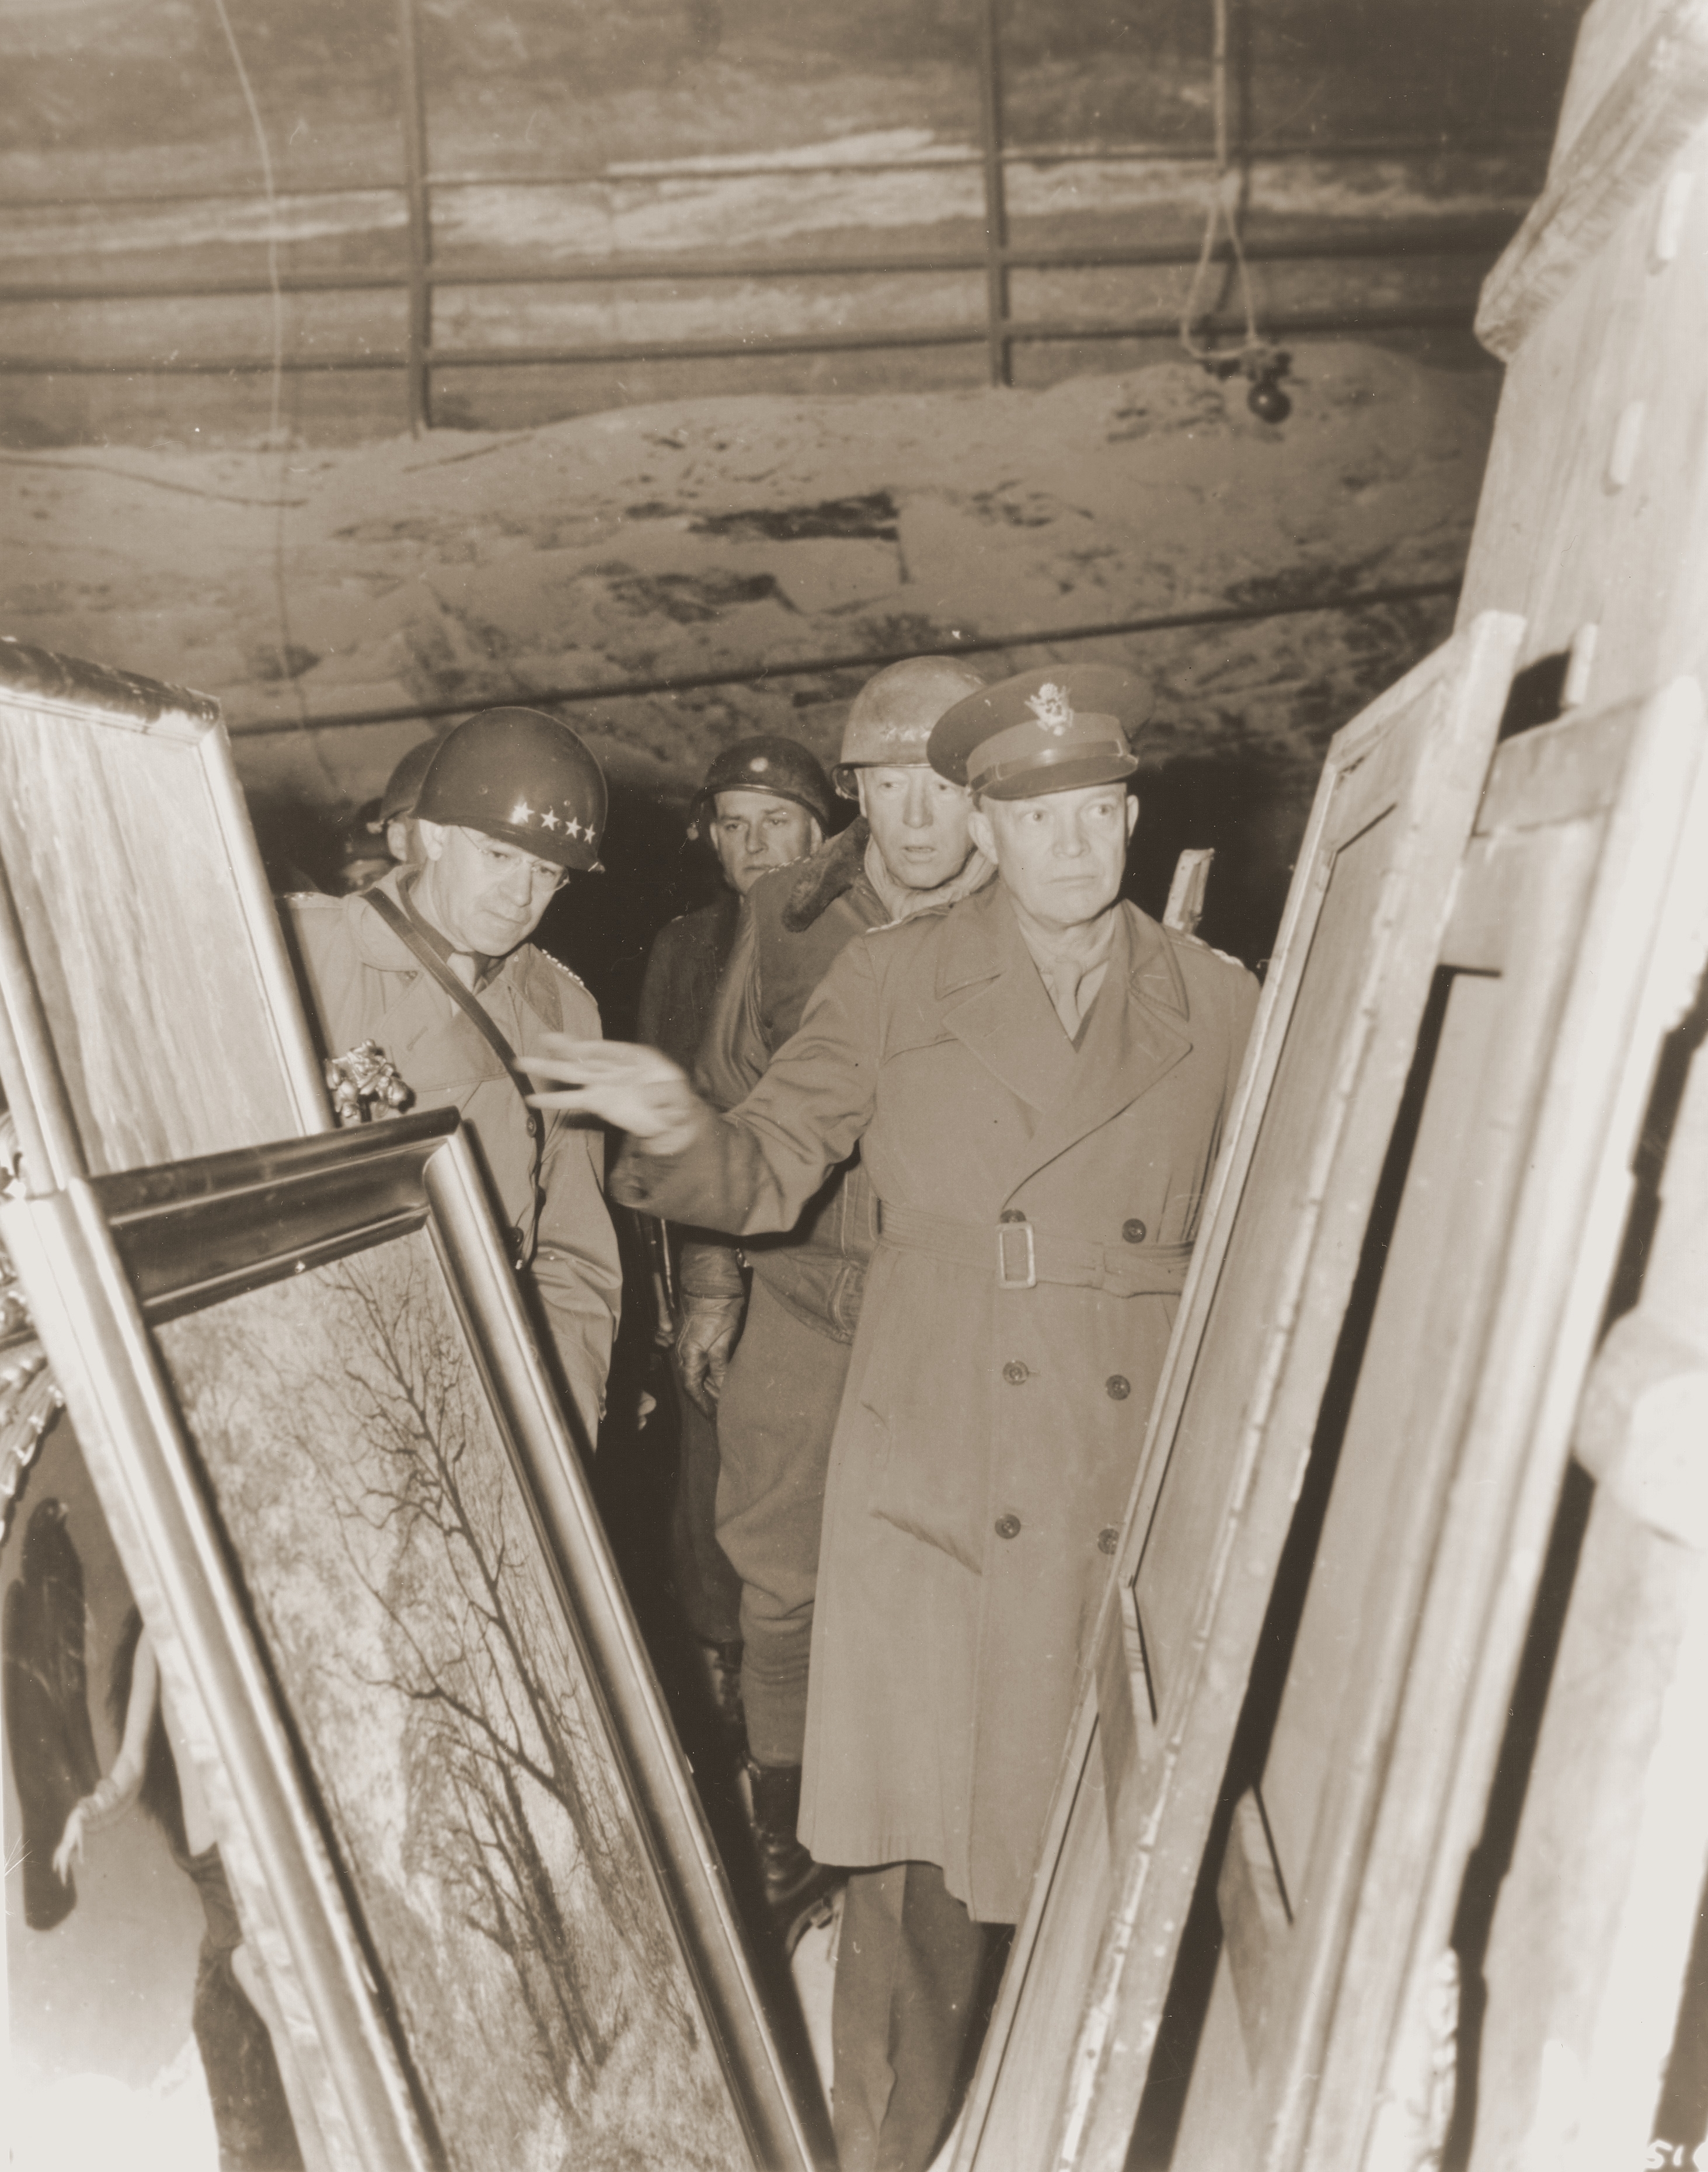 Patton, Eisenhower examining looted paintings